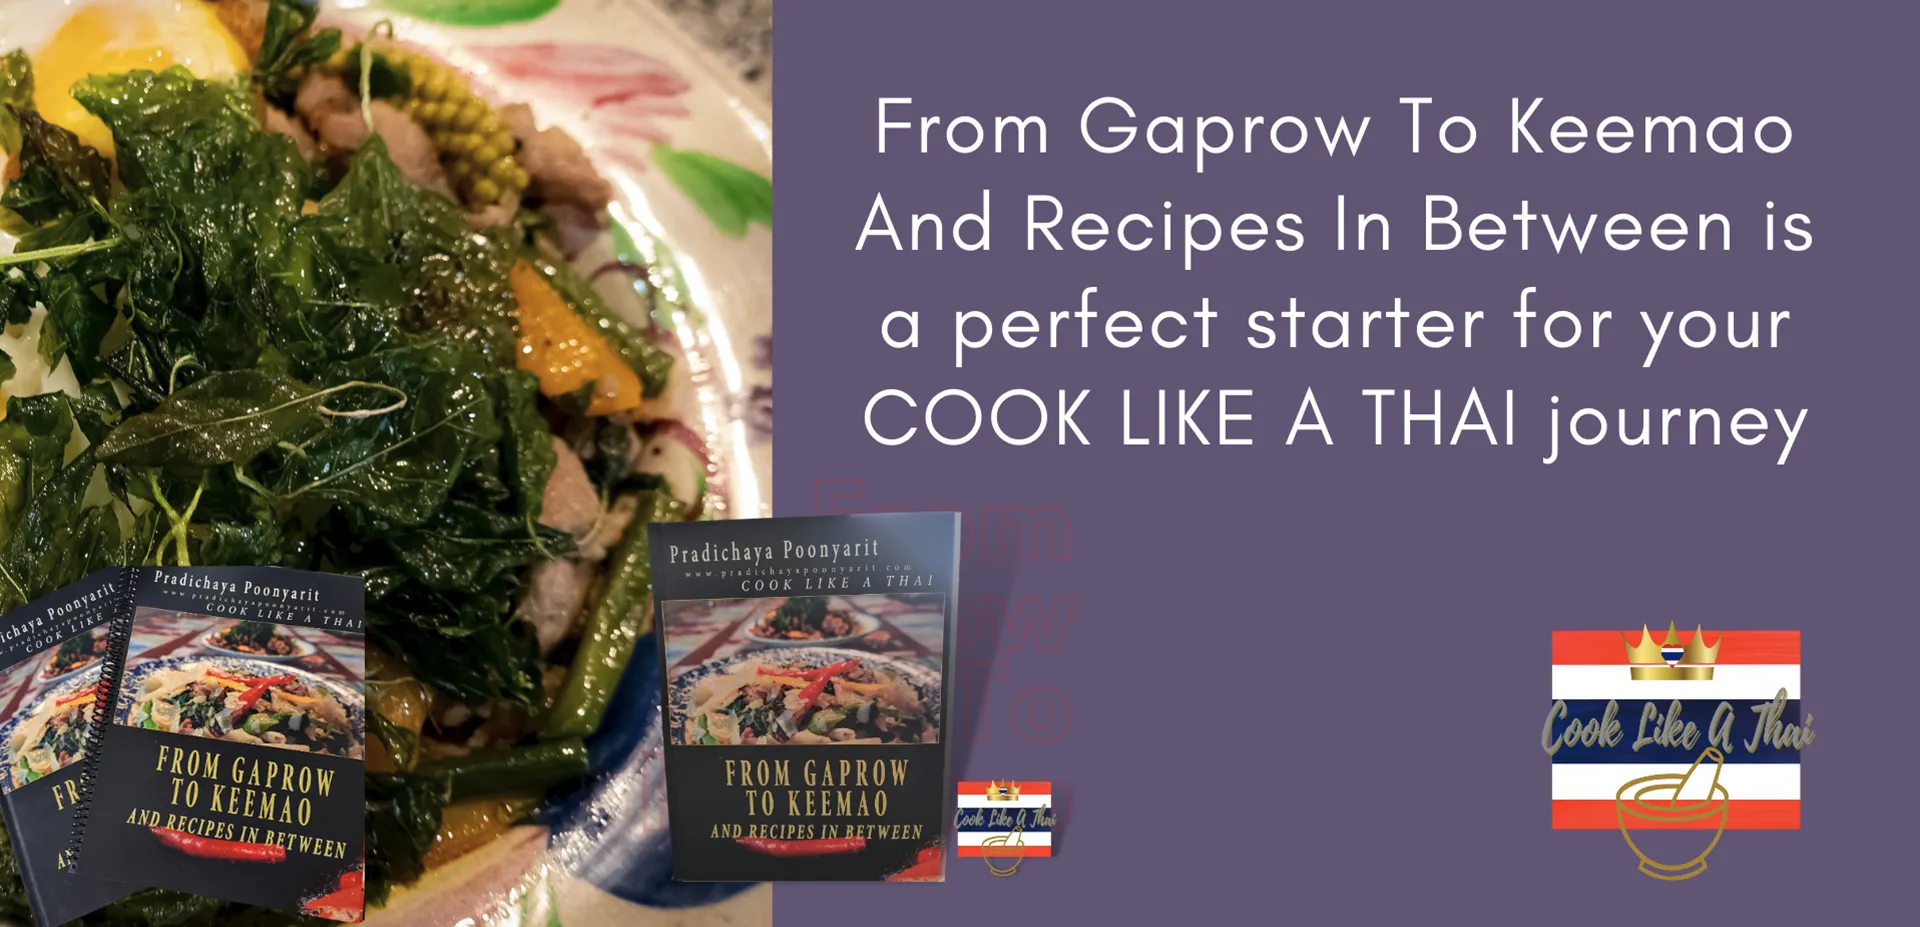 From Gaprow To Keemao And Recipes In Between: the most truthful and true form of how to cook simple yet, popular street food, from gaprow to puddkeemao noodles - and all the dishes that derive between the two of them. 